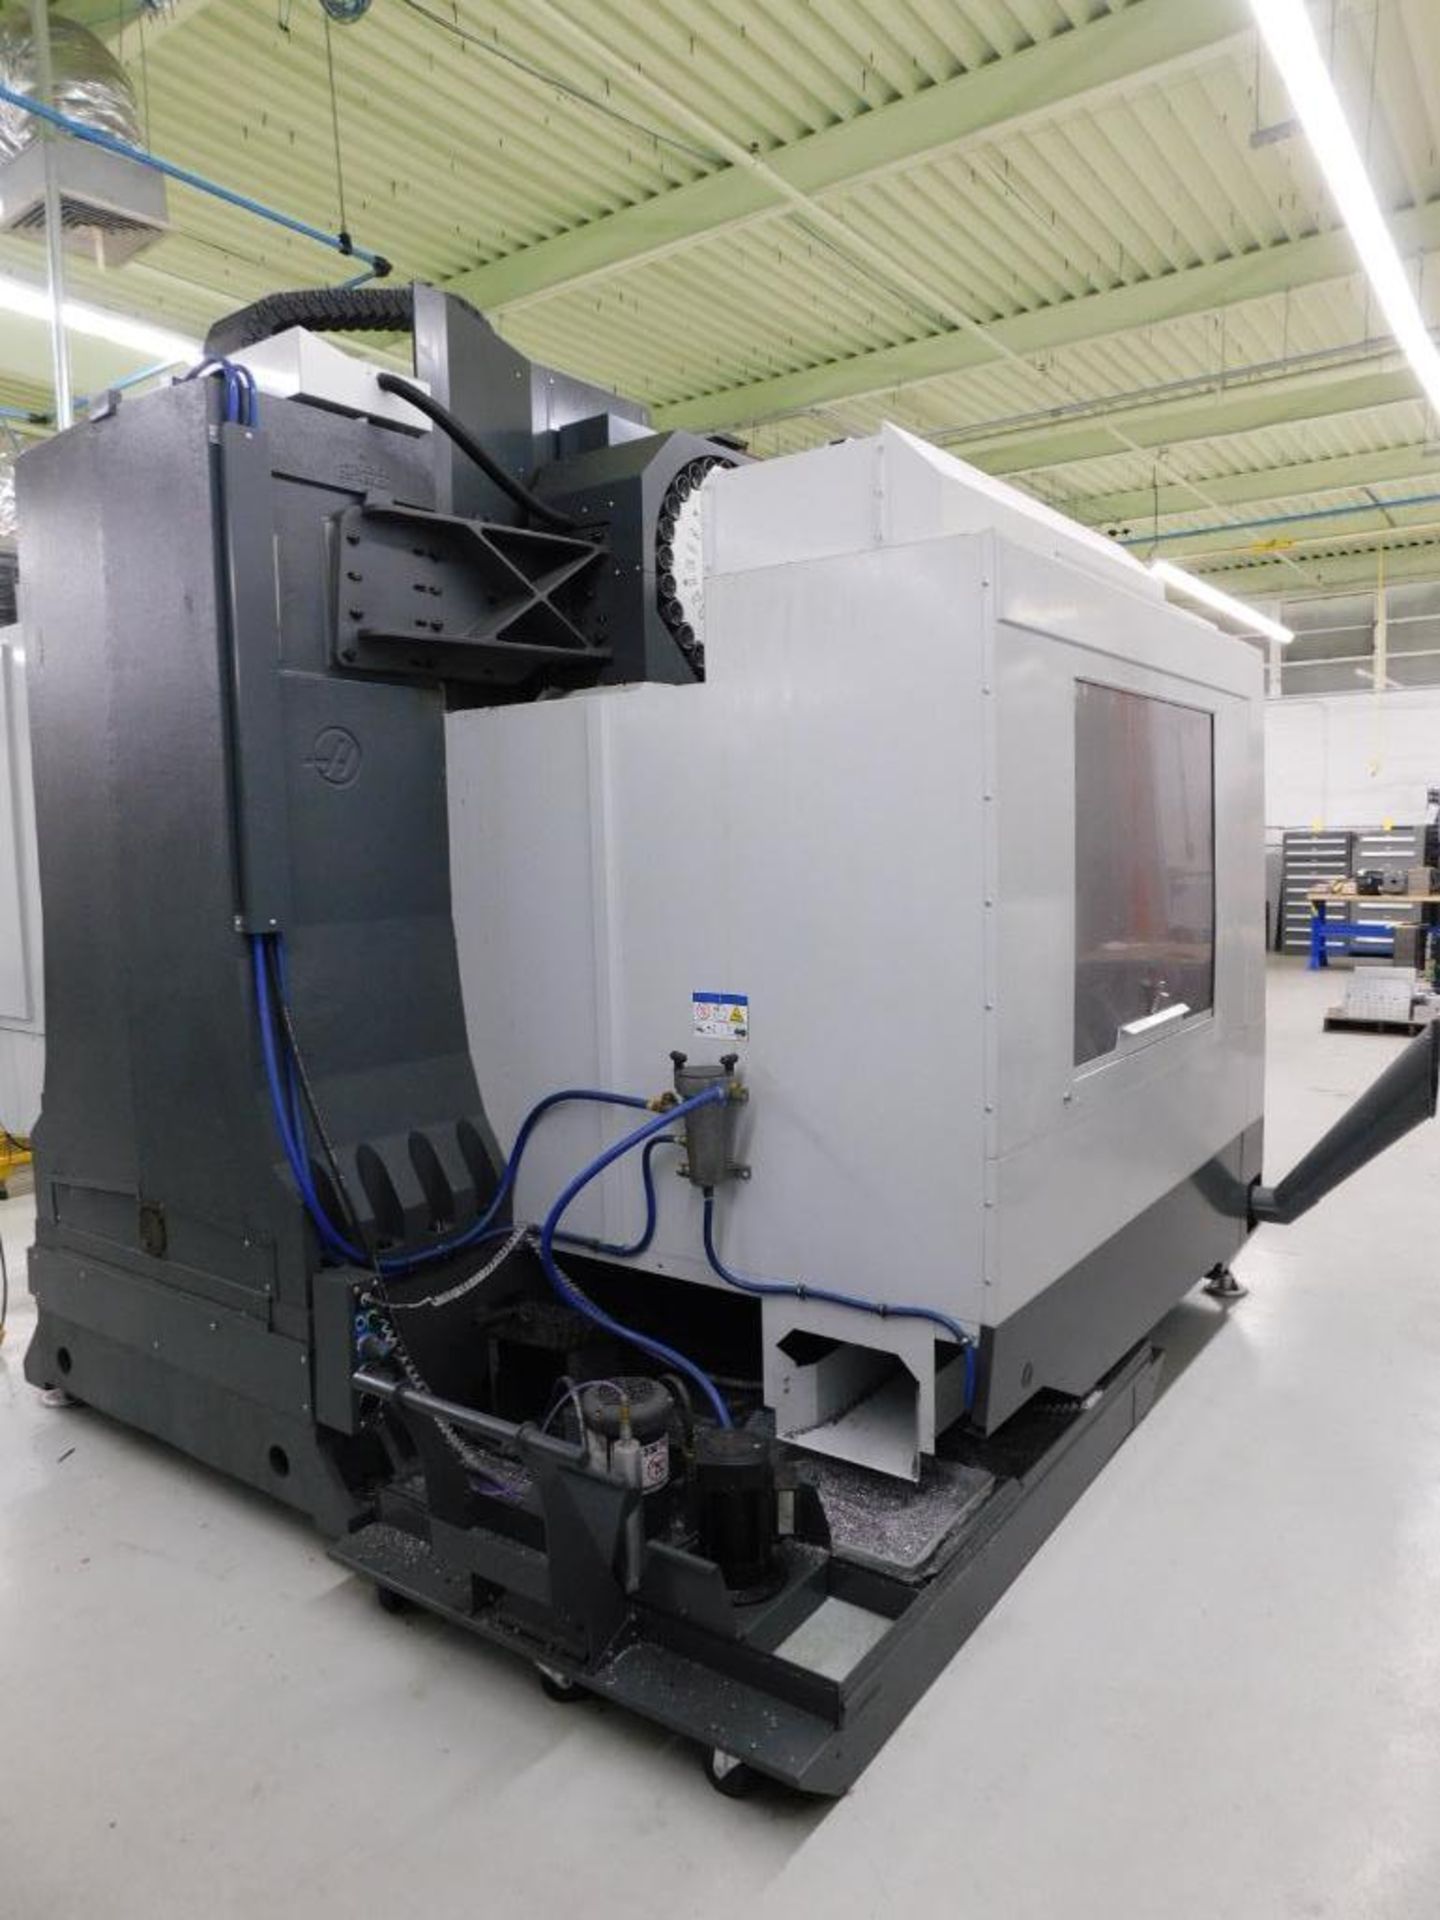 Haas VF-8/40 CNC Vertical Machining Center, Haas CNC Control w/Remote Pendant, Travels: X-64", Y-40" - Image 4 of 13